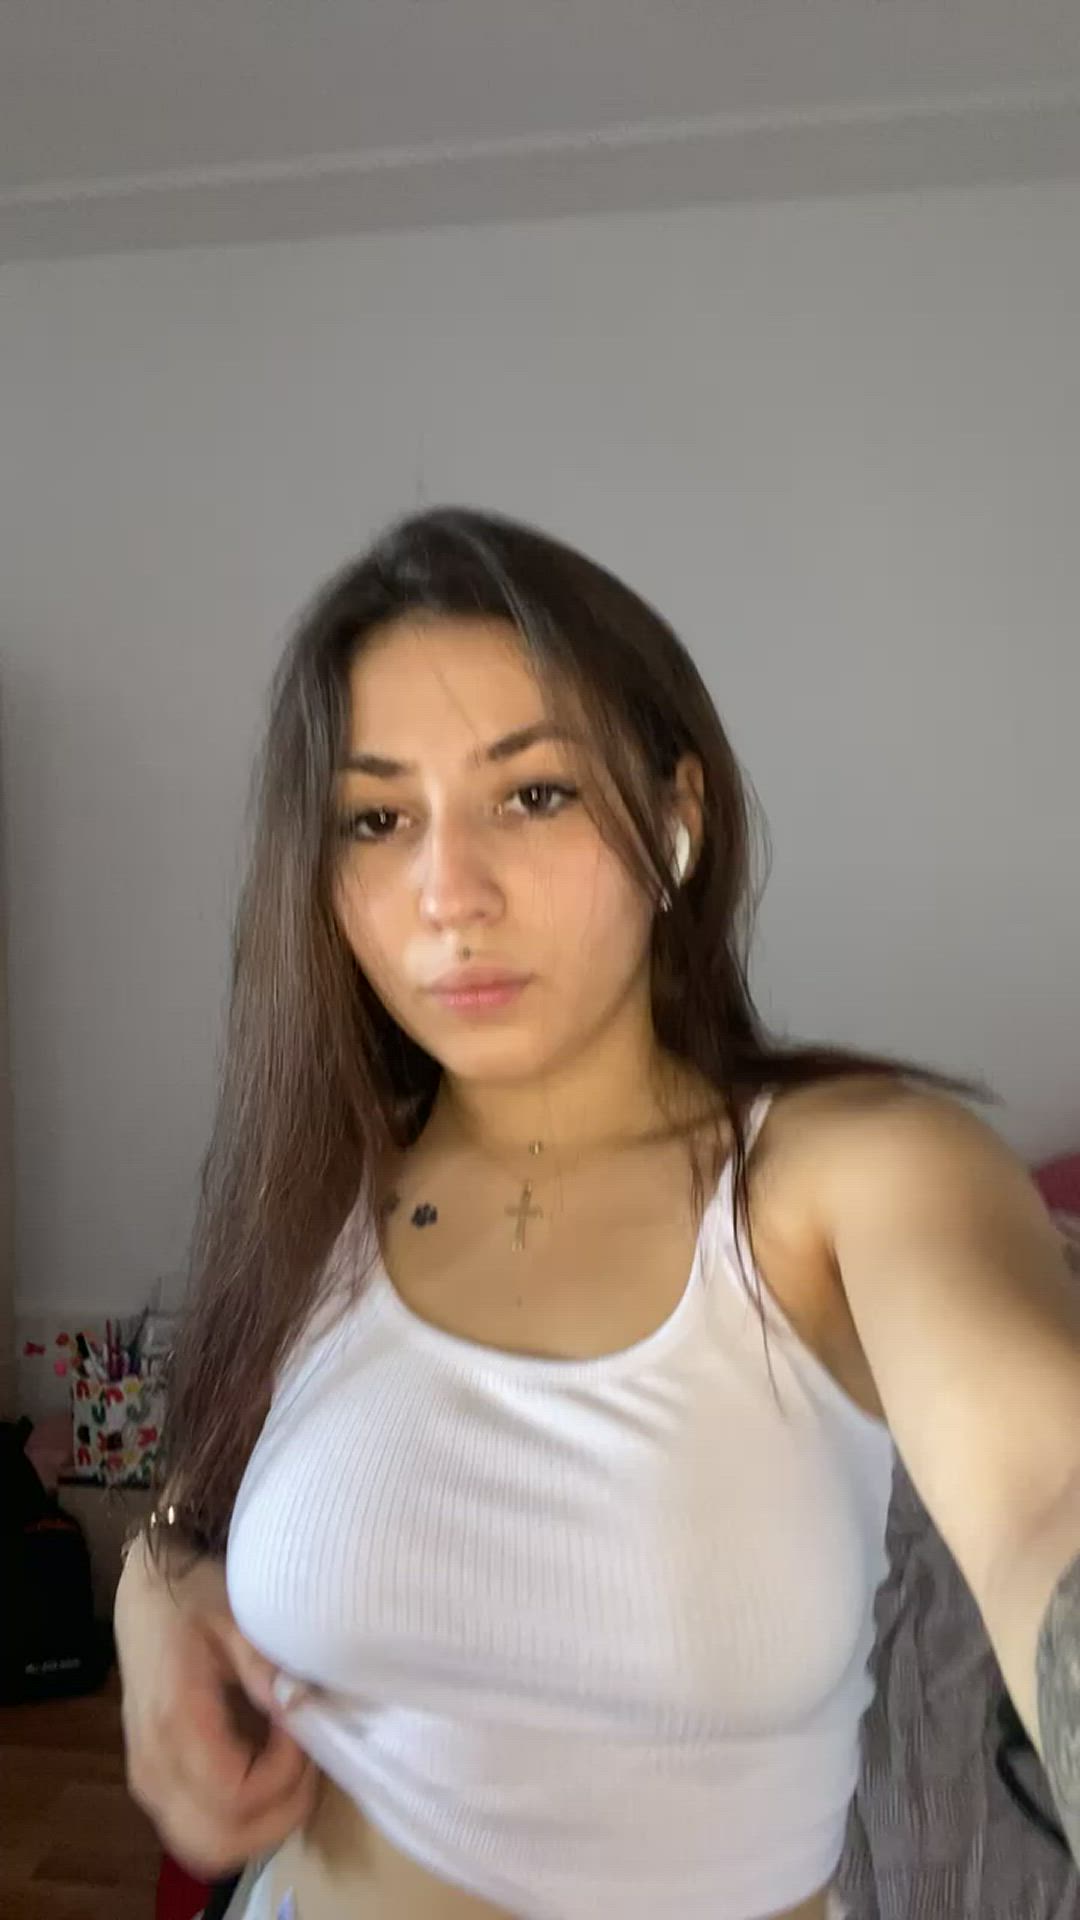 Amateur porn video with onlyfans model miamillic <strong>@miamillic</strong>